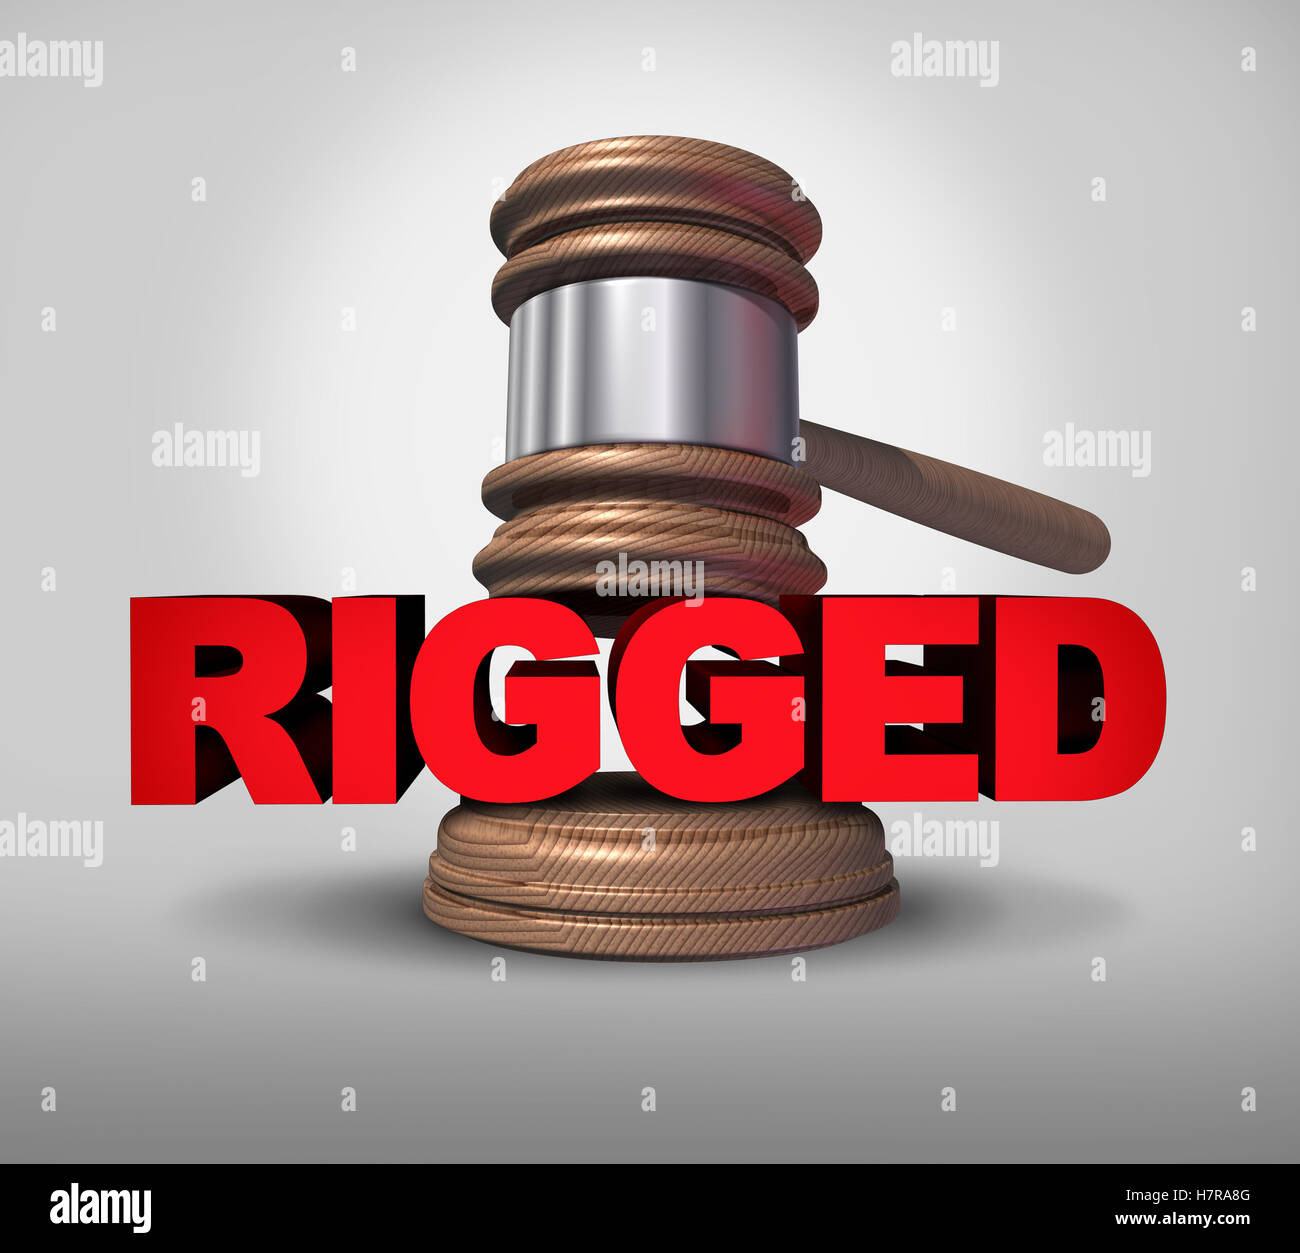 Concept of fraud and corrupt system giving an unfair advantage as text with the word rigged with a justice mallet as a metaphor Stock Photo